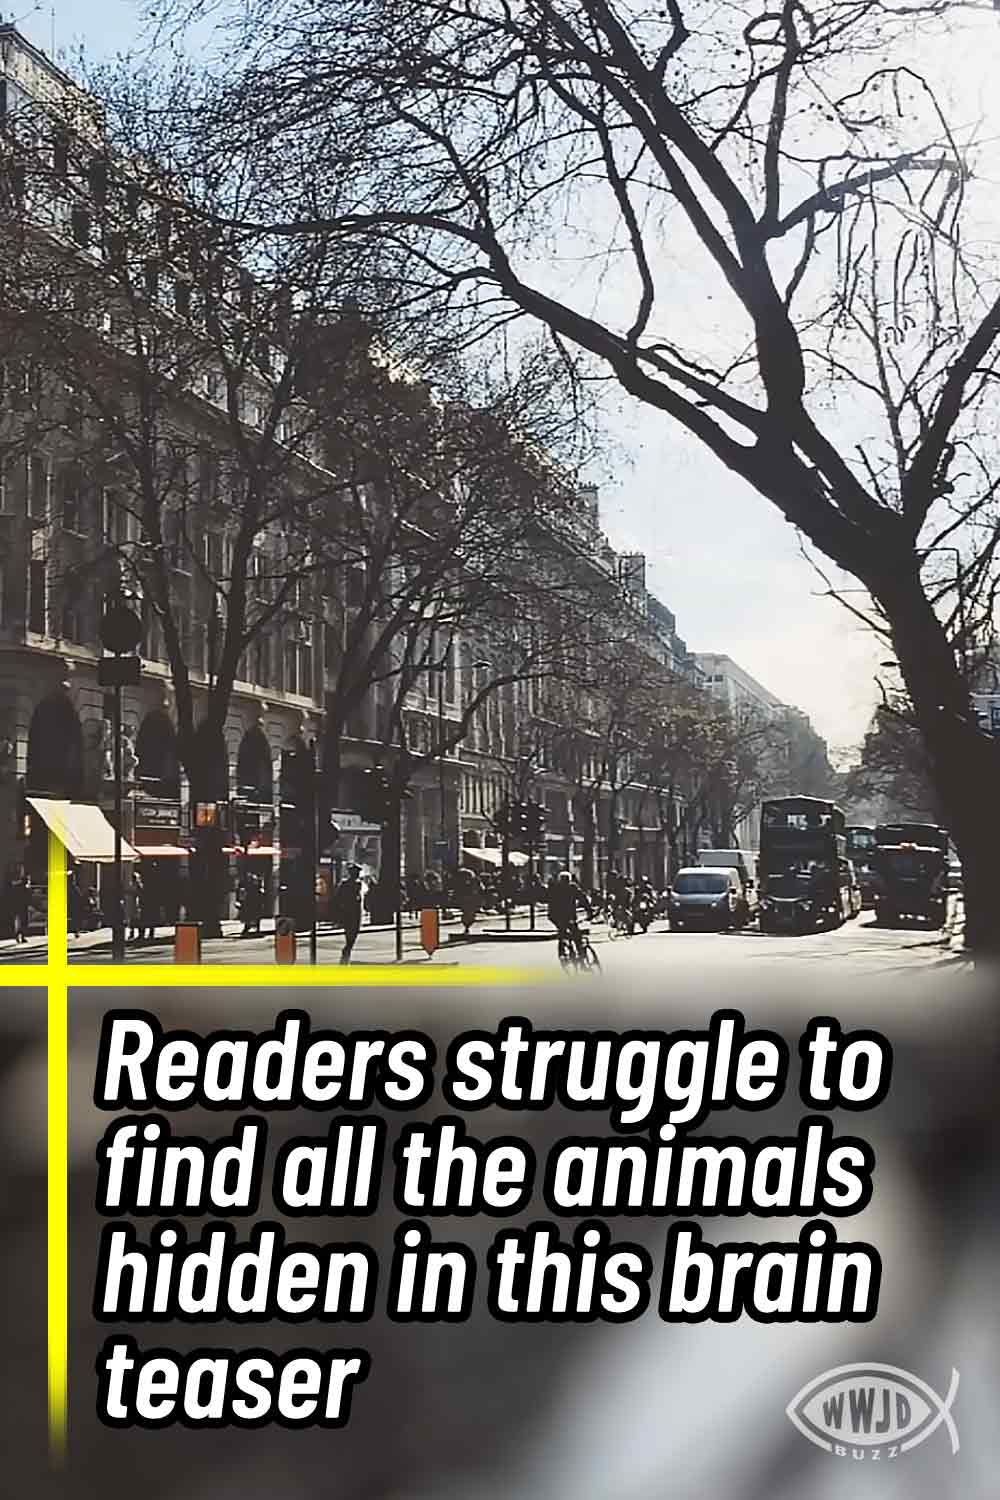 Readers struggle to find all the animals hidden in this brain teaser